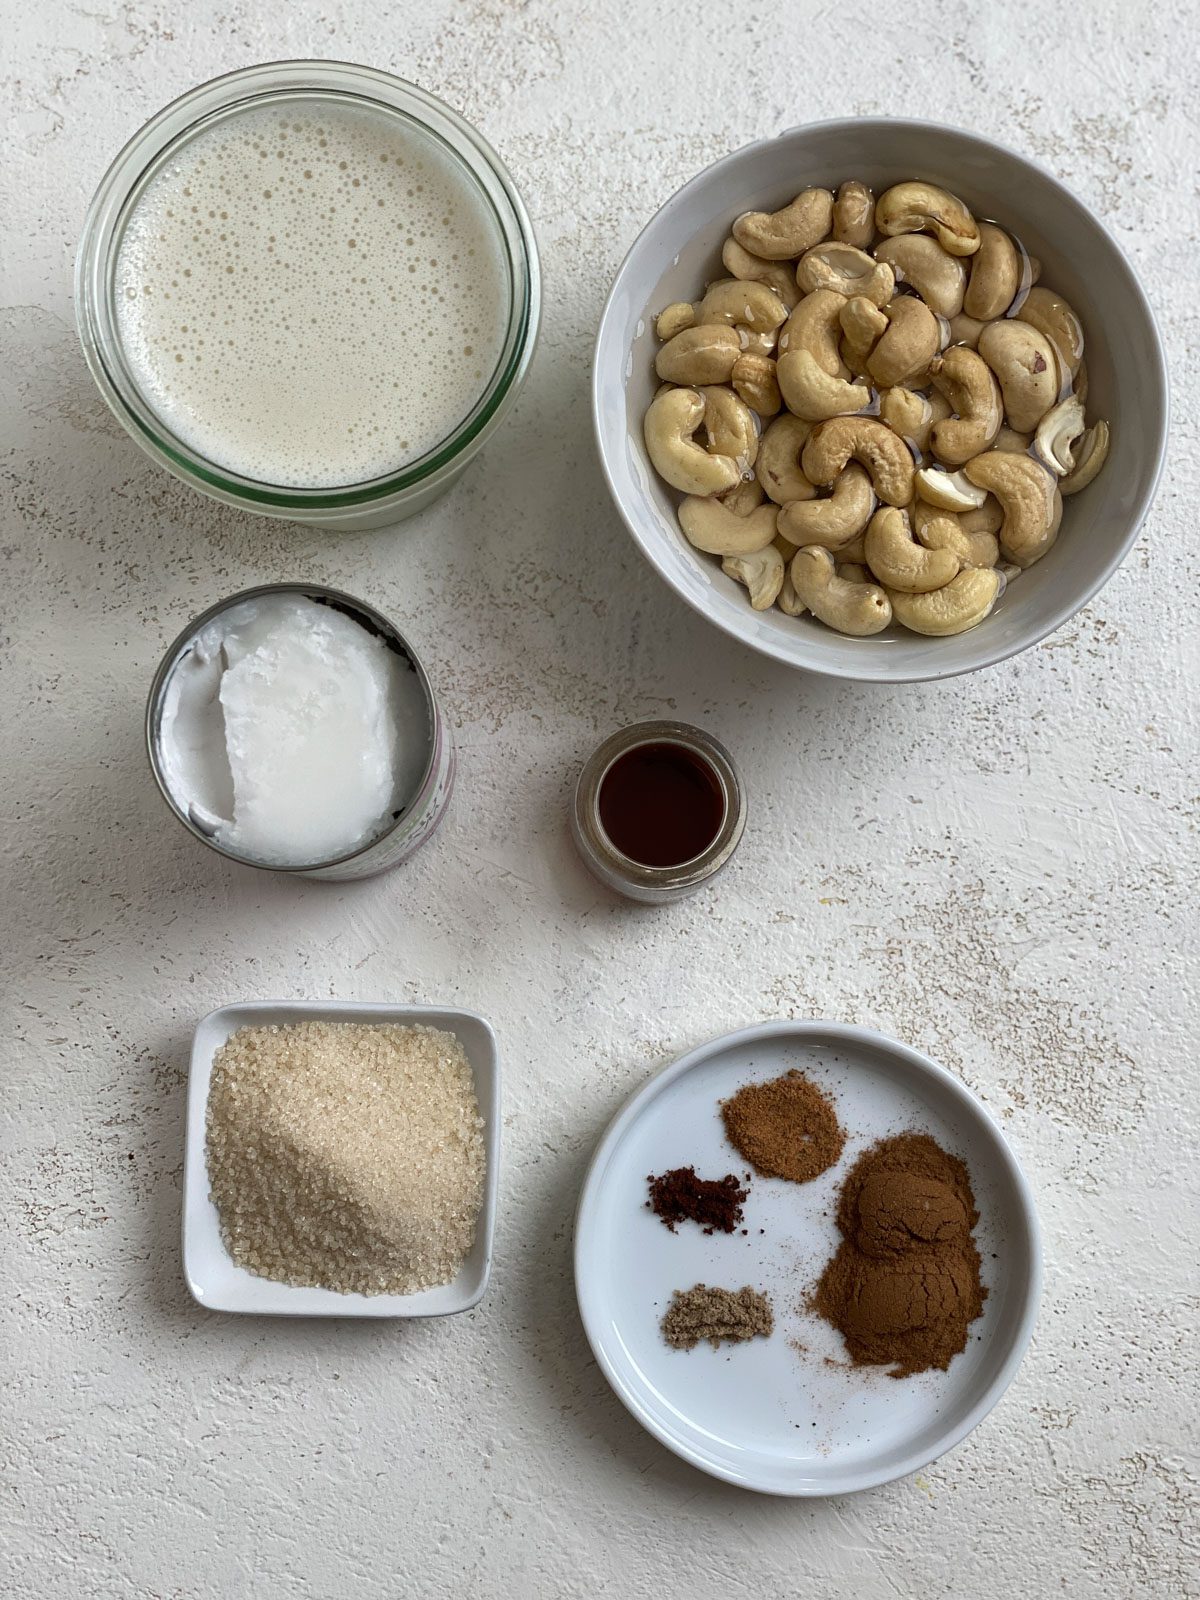 ingredients for Super Creamy Vegan Eggnog measured out against a white surface